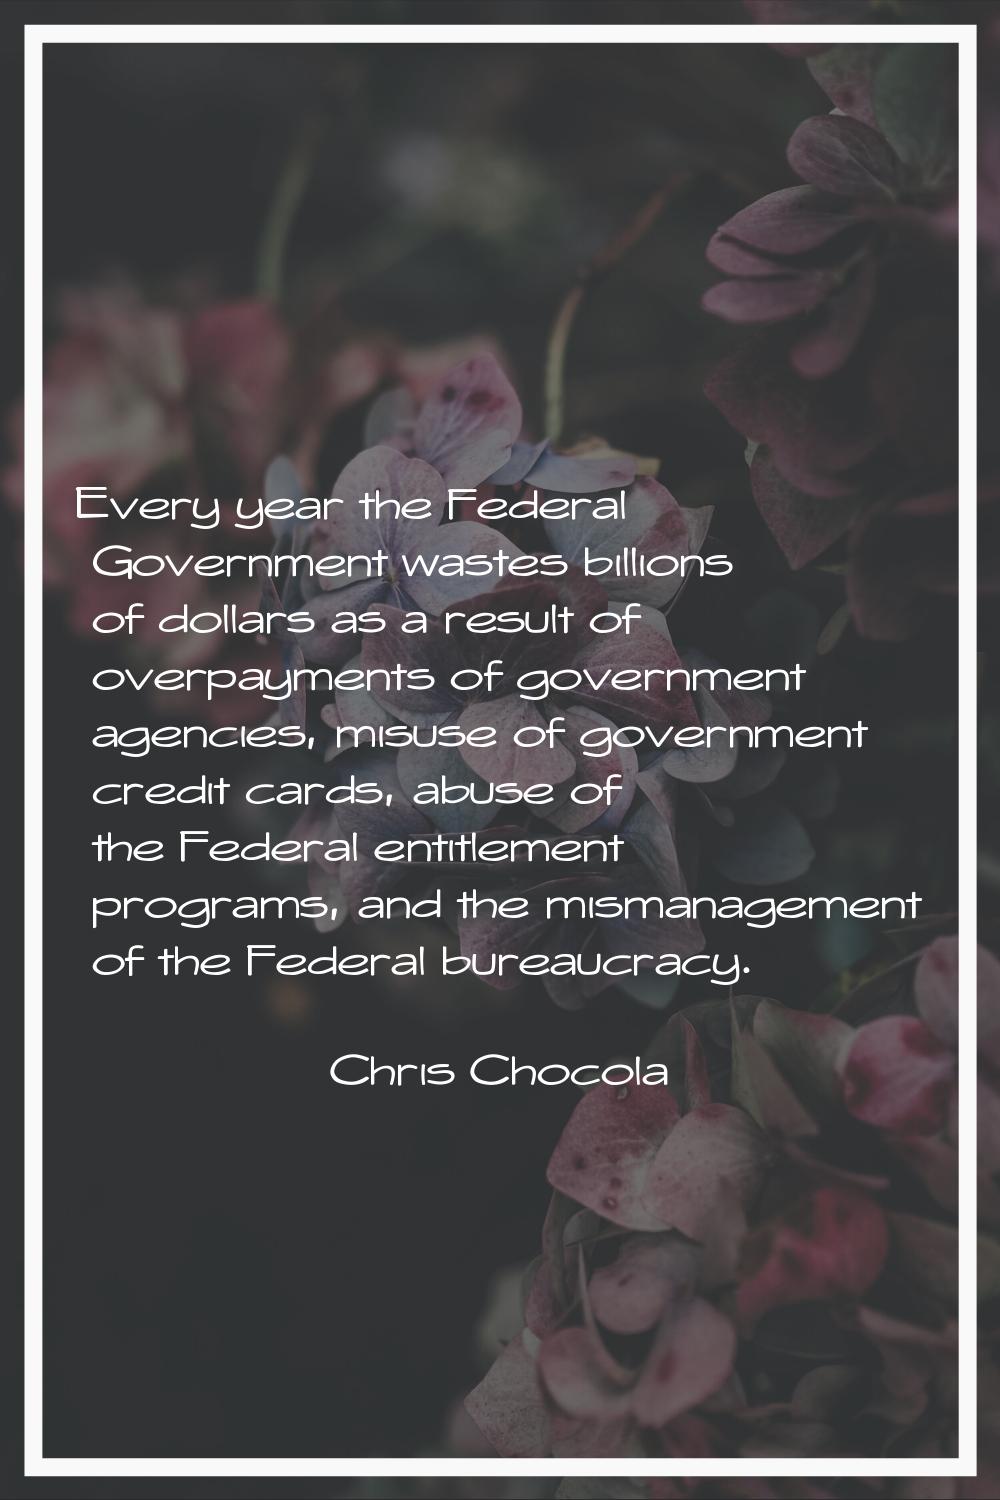 Every year the Federal Government wastes billions of dollars as a result of overpayments of governm